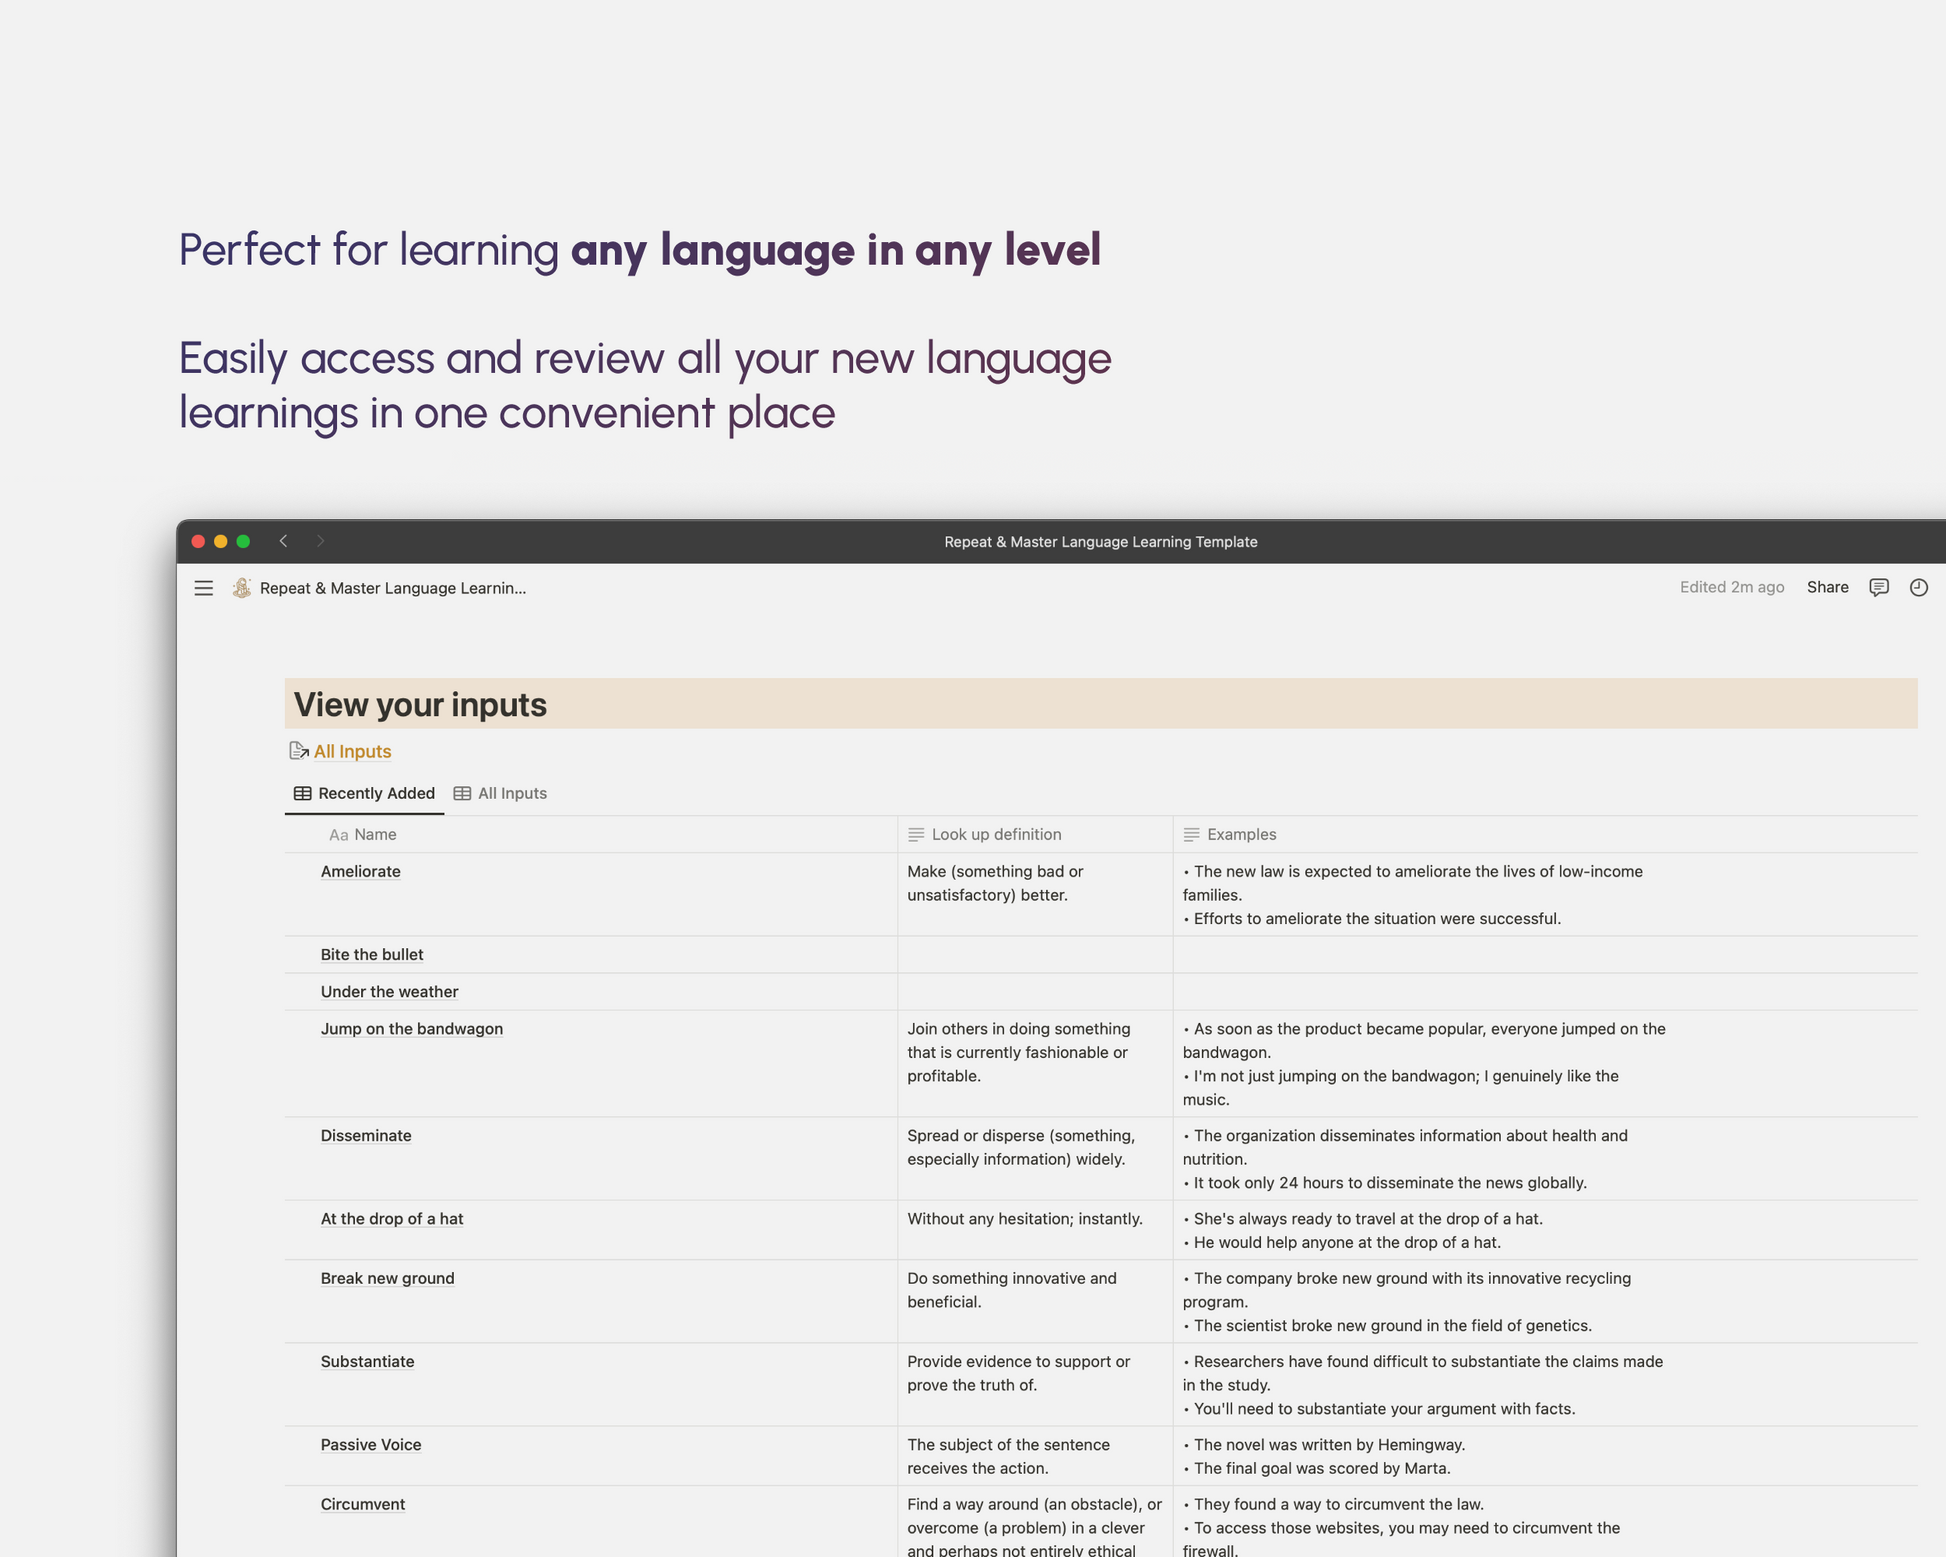 A Notion template interface highlighting a view for language learning inputs with examples of phrases and idioms, designed for easy access and review